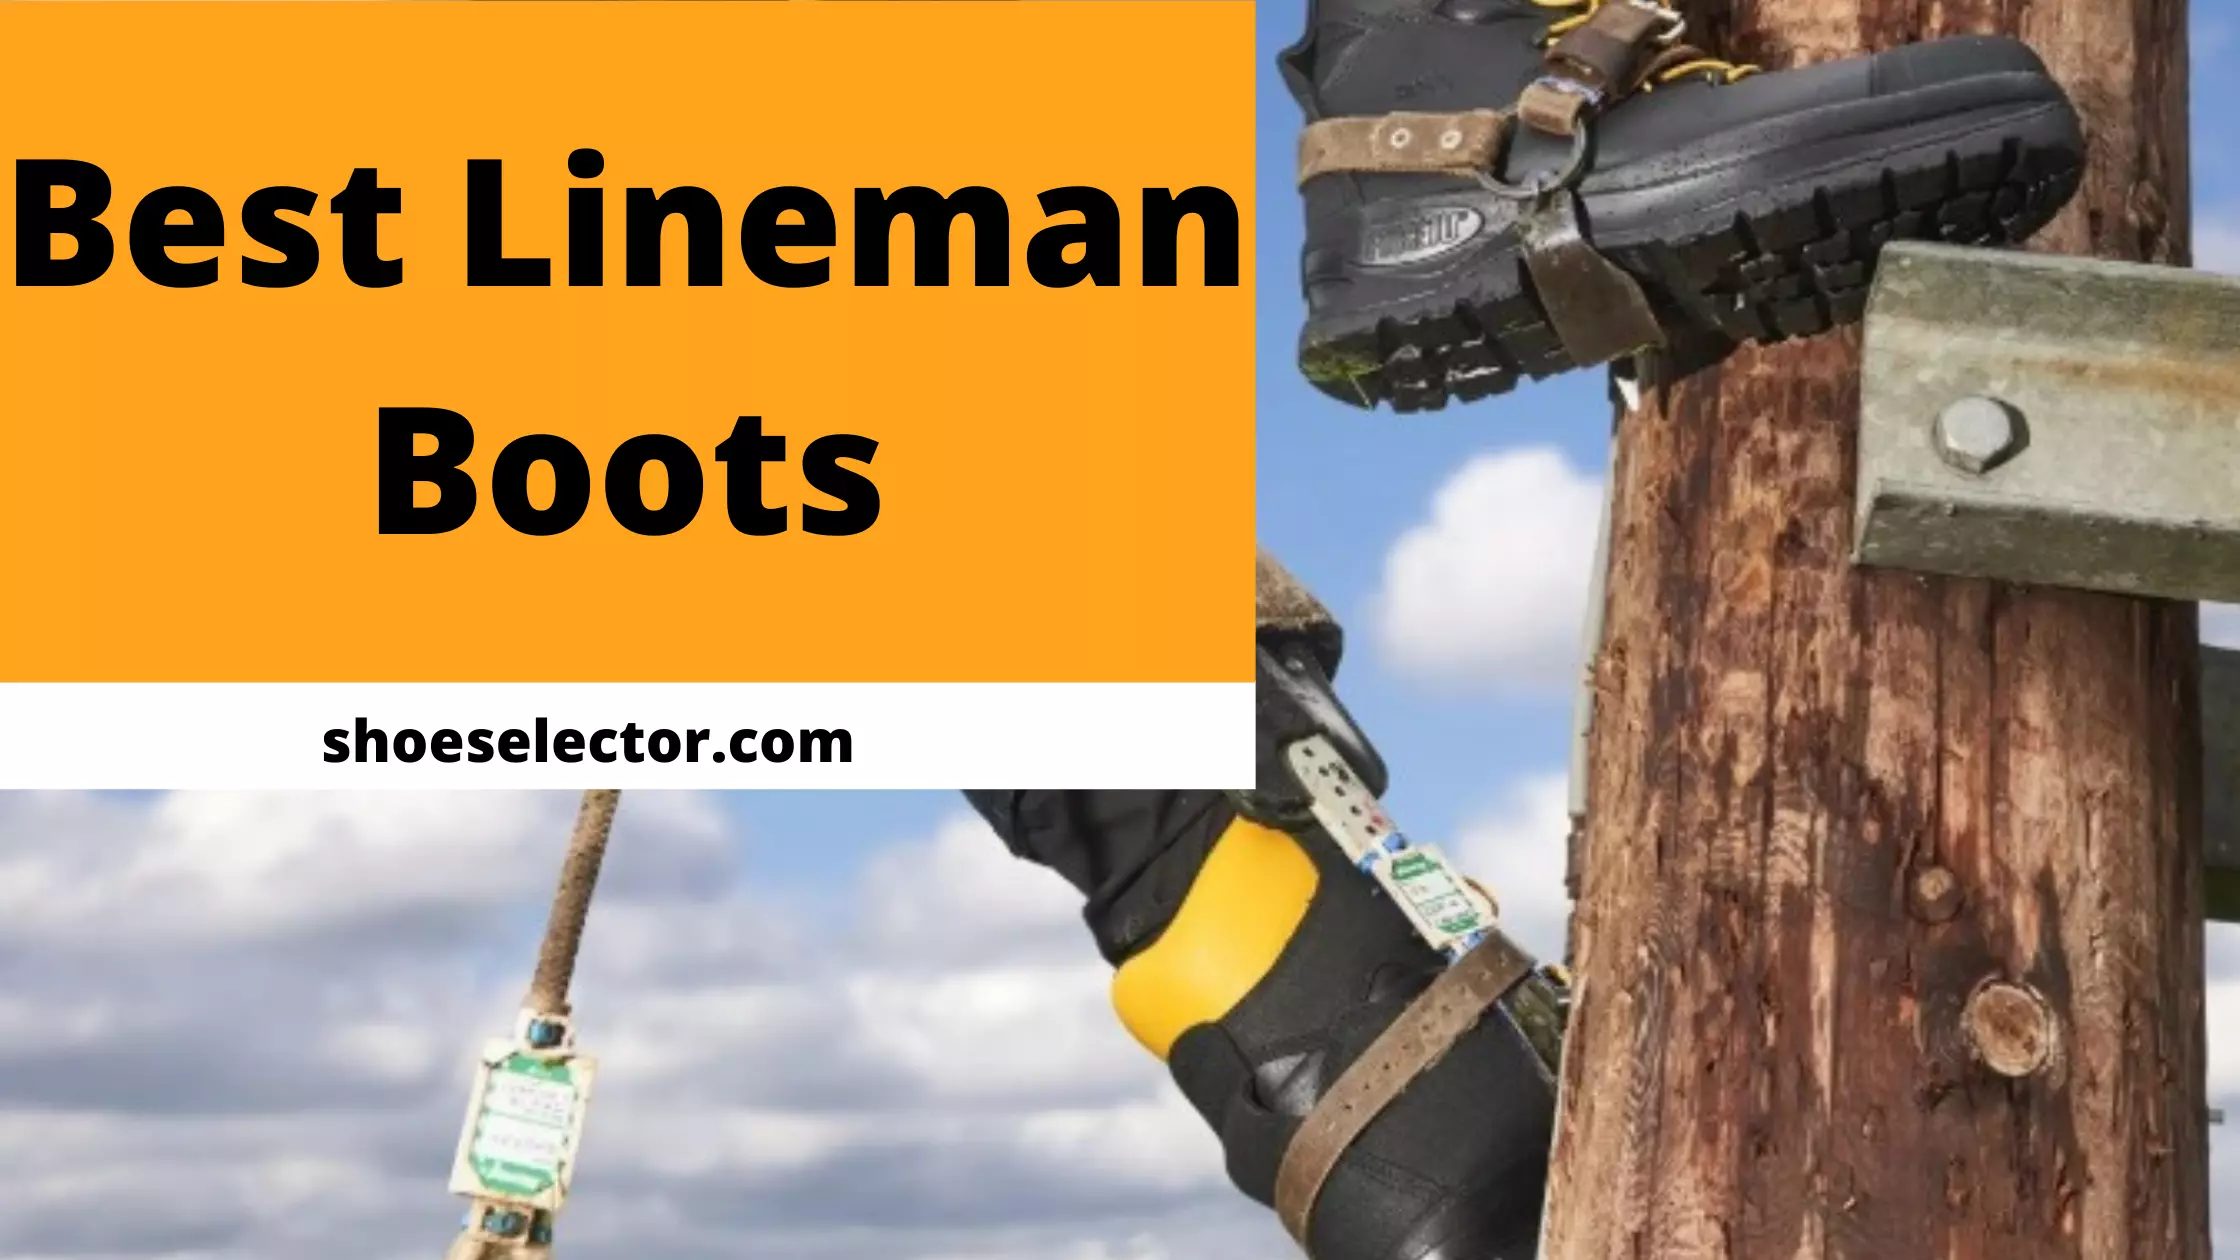 Best Lineman Boots - Detailed Guide Available